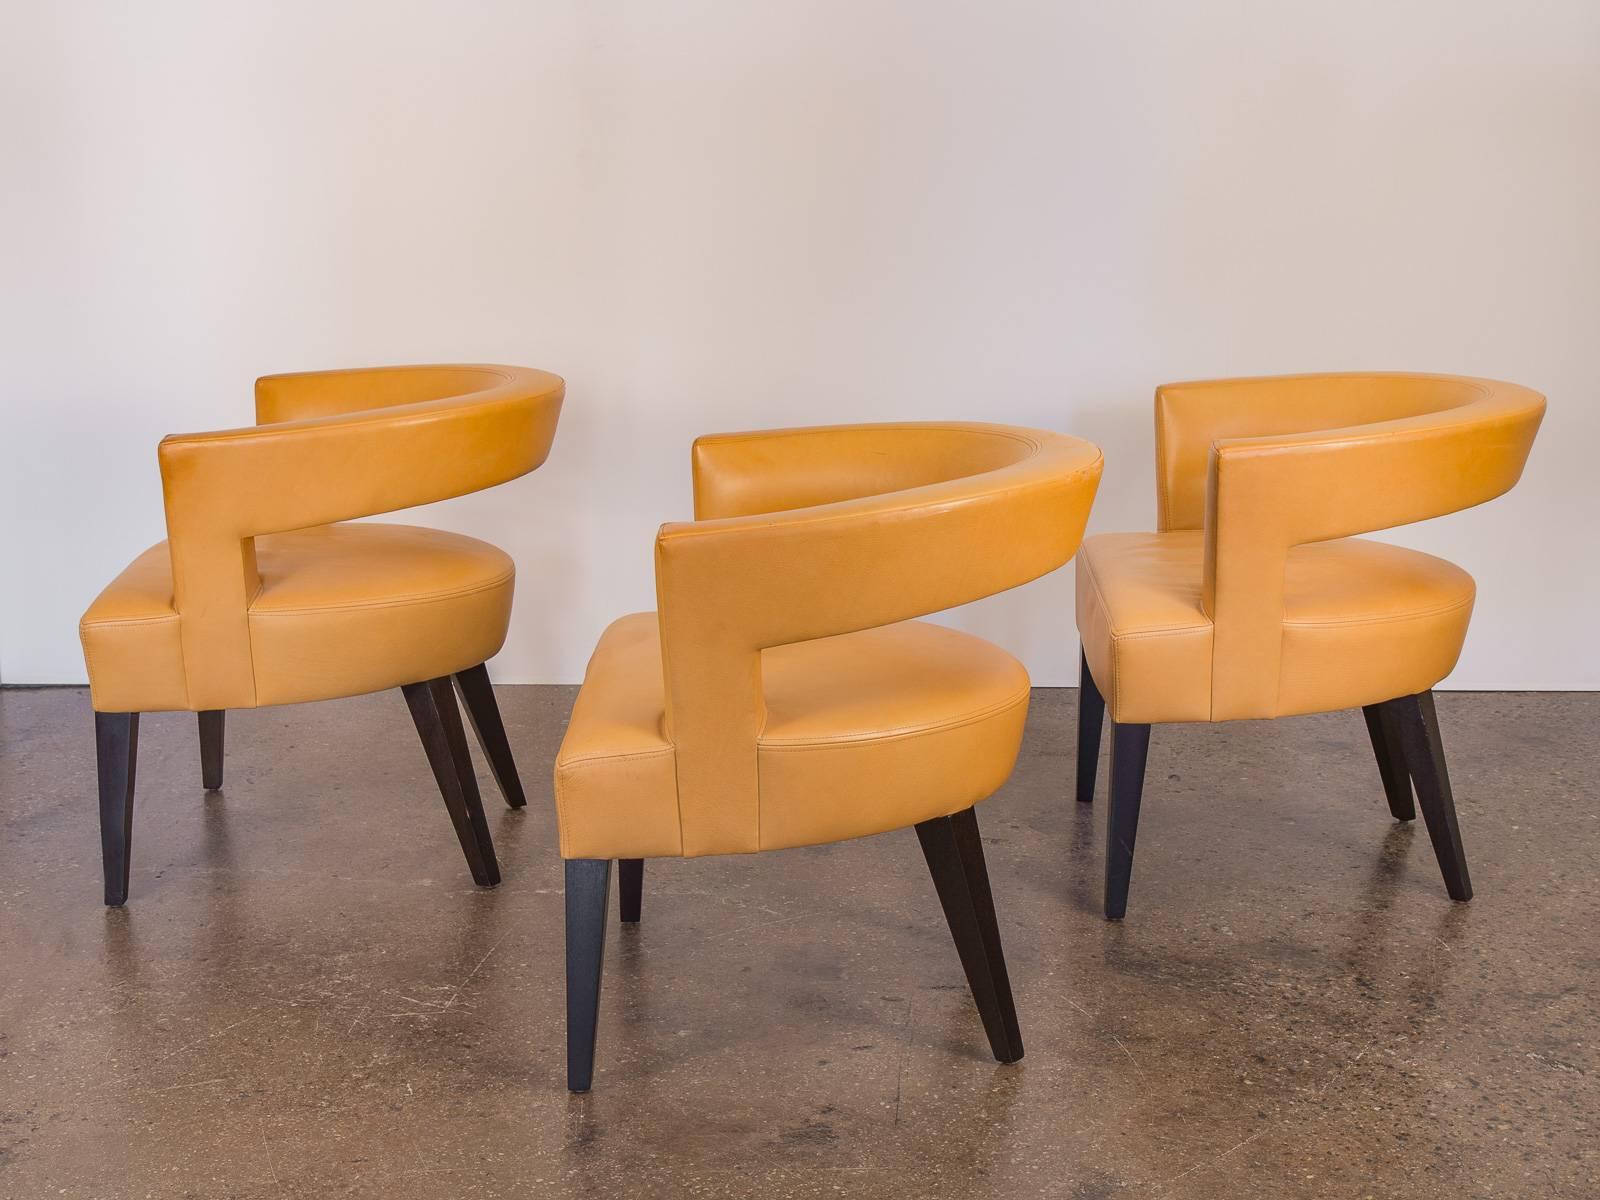 Three, contemporary leather ringback chairs on solid cherry, ebonized legs by Dakota Jackson. Striking set of chairs for any seating area. These chairs are in good condition—the double-stitched, buttery canary-mustard leather has a fine patina with